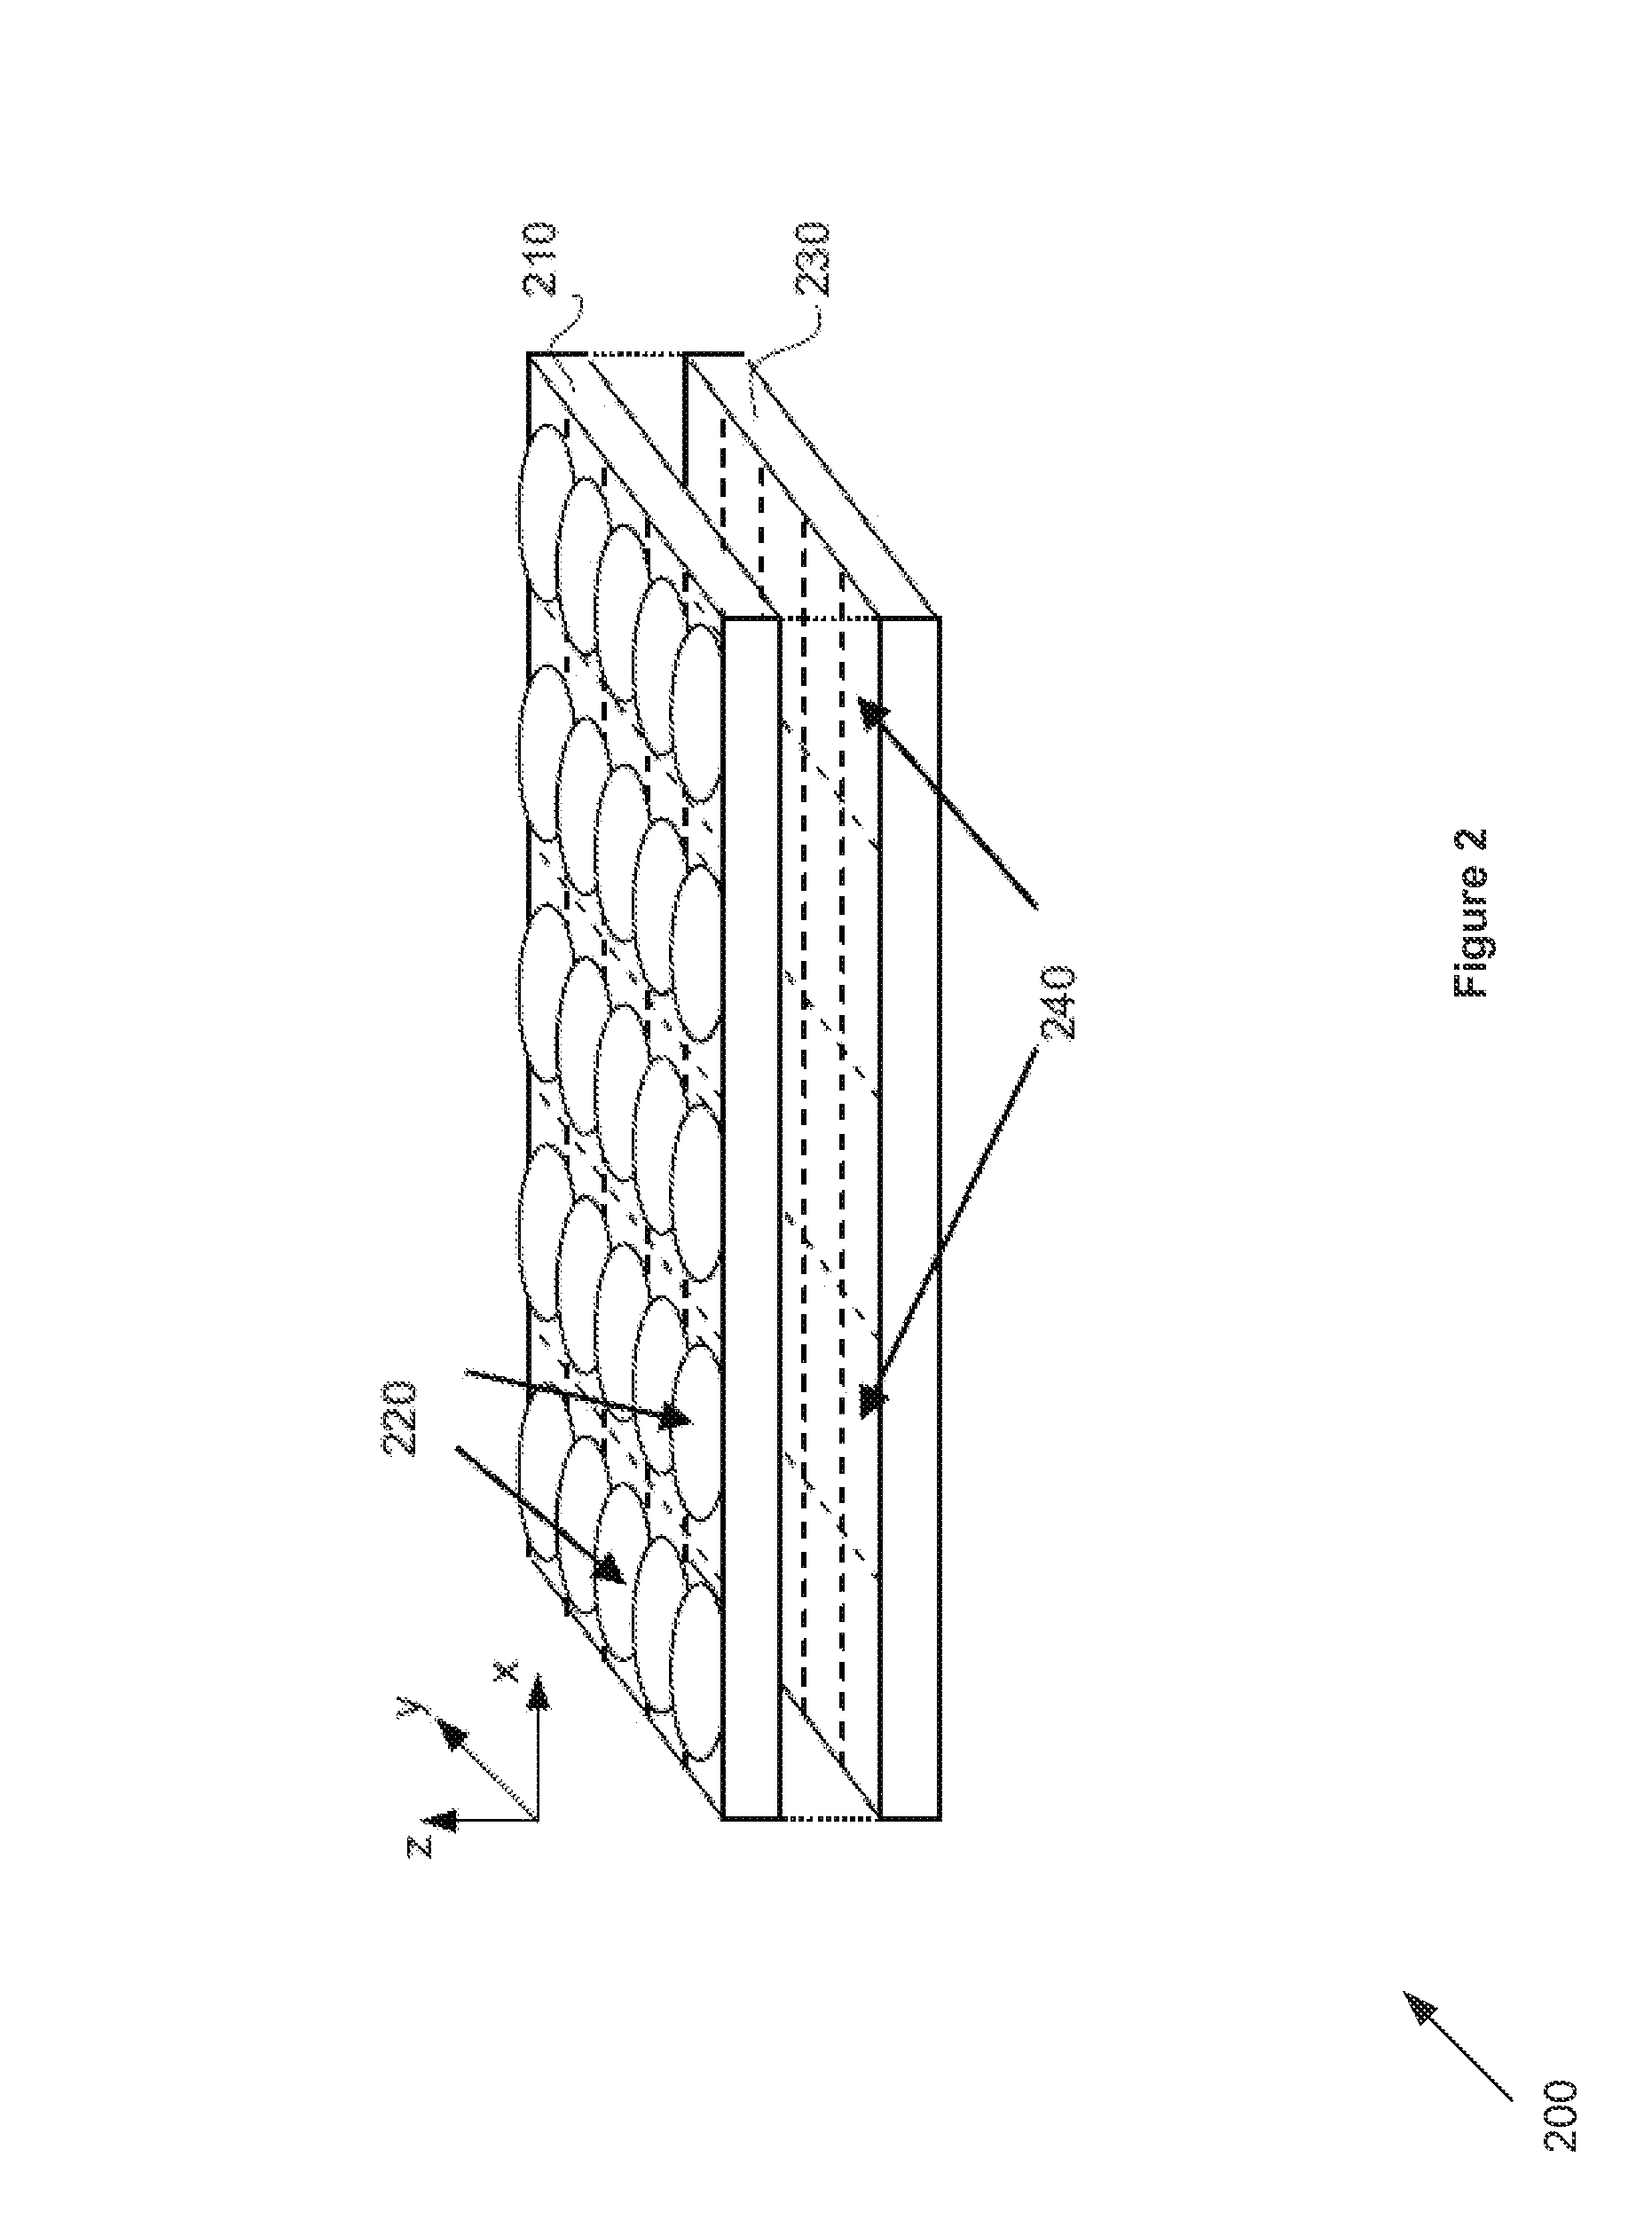 Systems and Methods for Providing an Array Projector